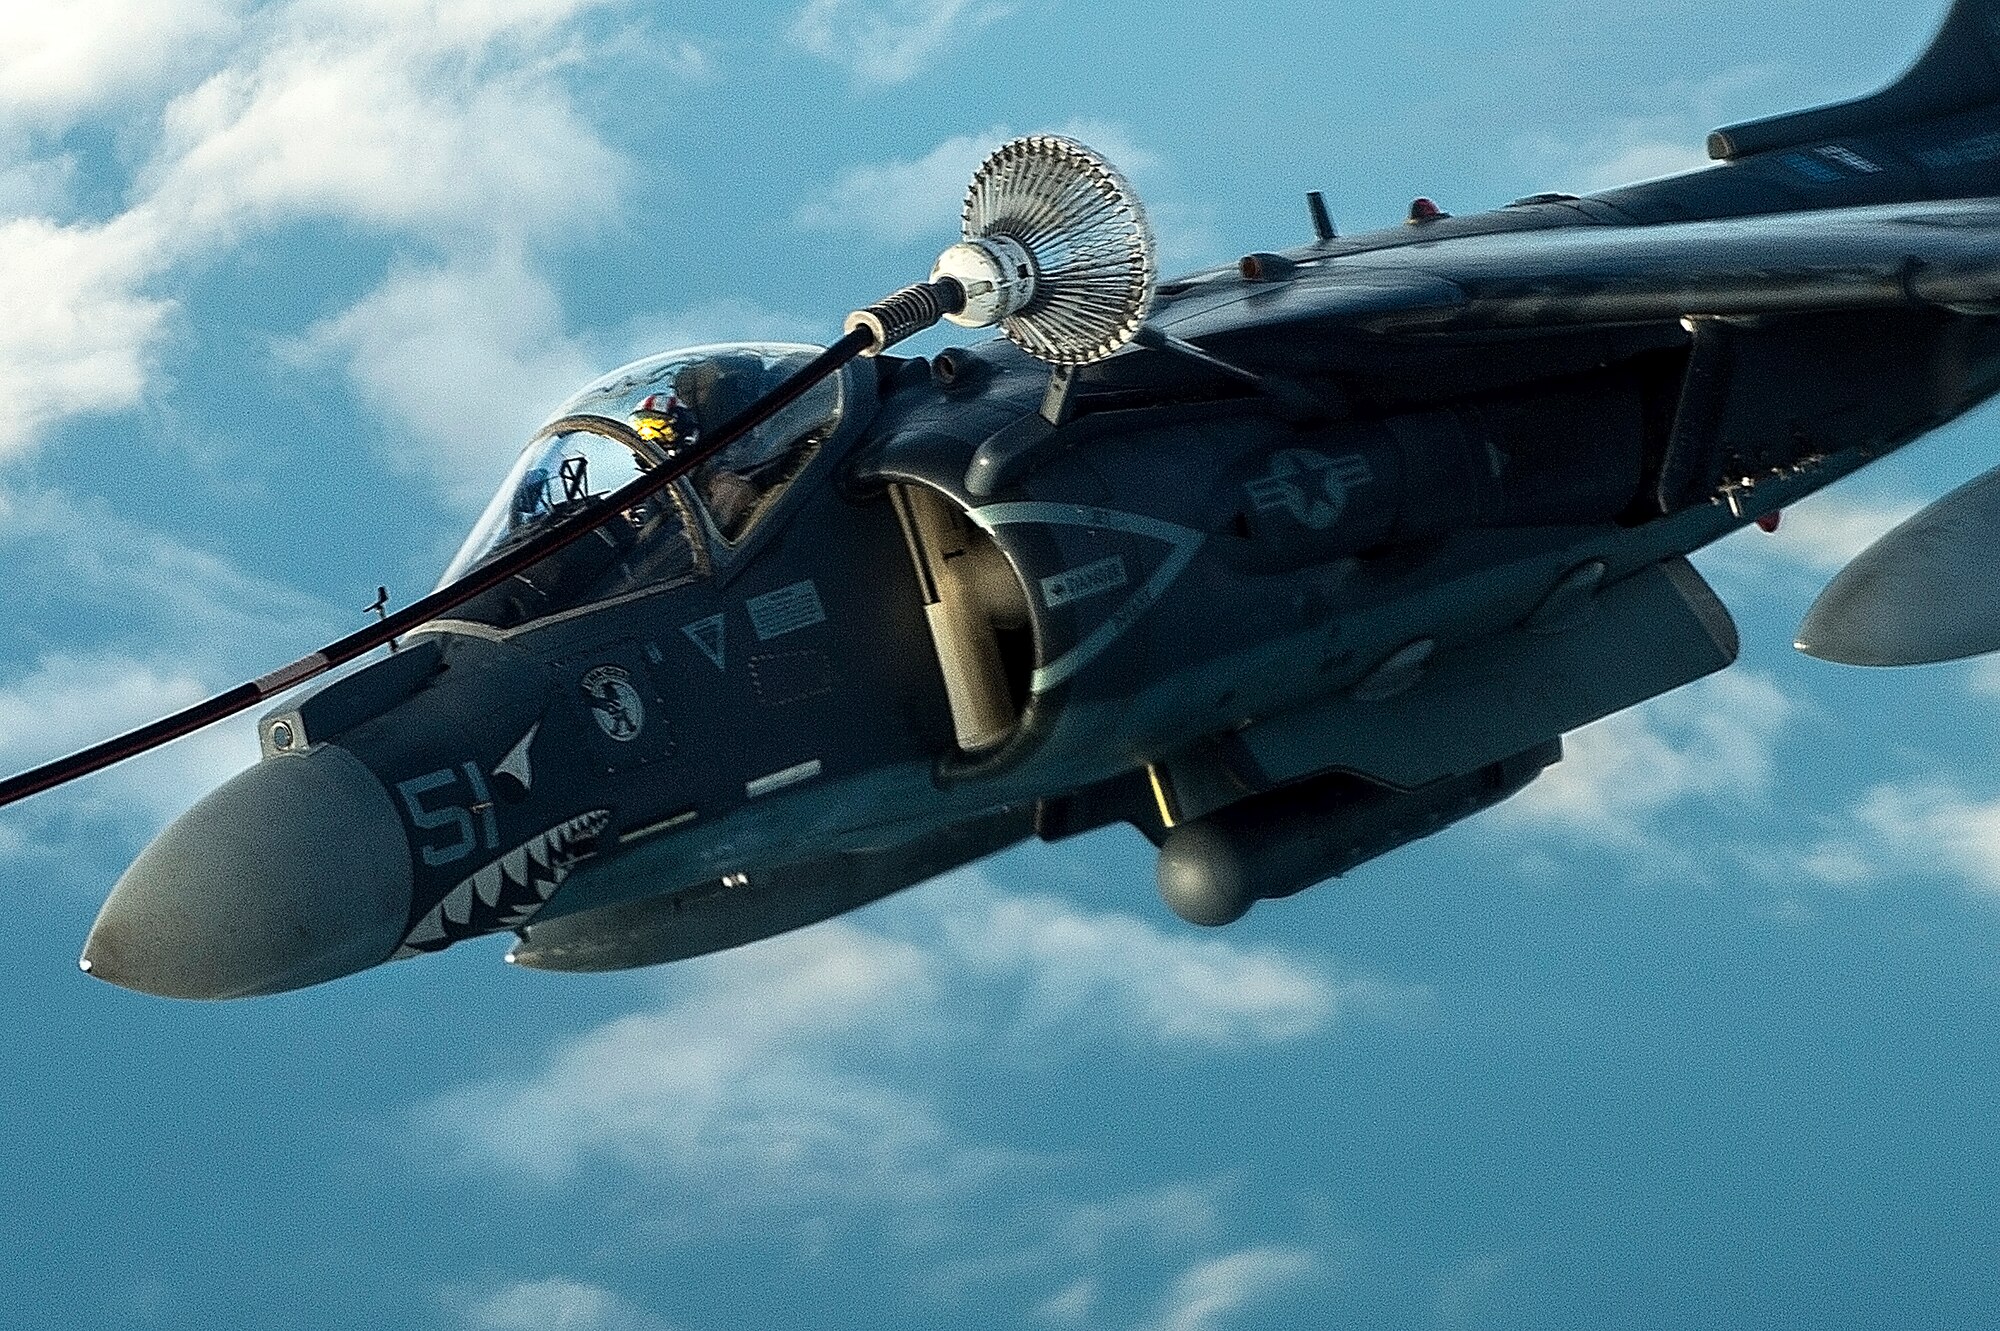 A U.S. Marine Corps AV-8B Harrier II refuels over Iraq in support of Operation Inherent Resolve, Dec. 31, 2015. The operation is the coalition intervention against the Islamic State of Iraq and the Levant. (U.S. Air Force photo by Tech. Sgt. Nathan Lipscomb)